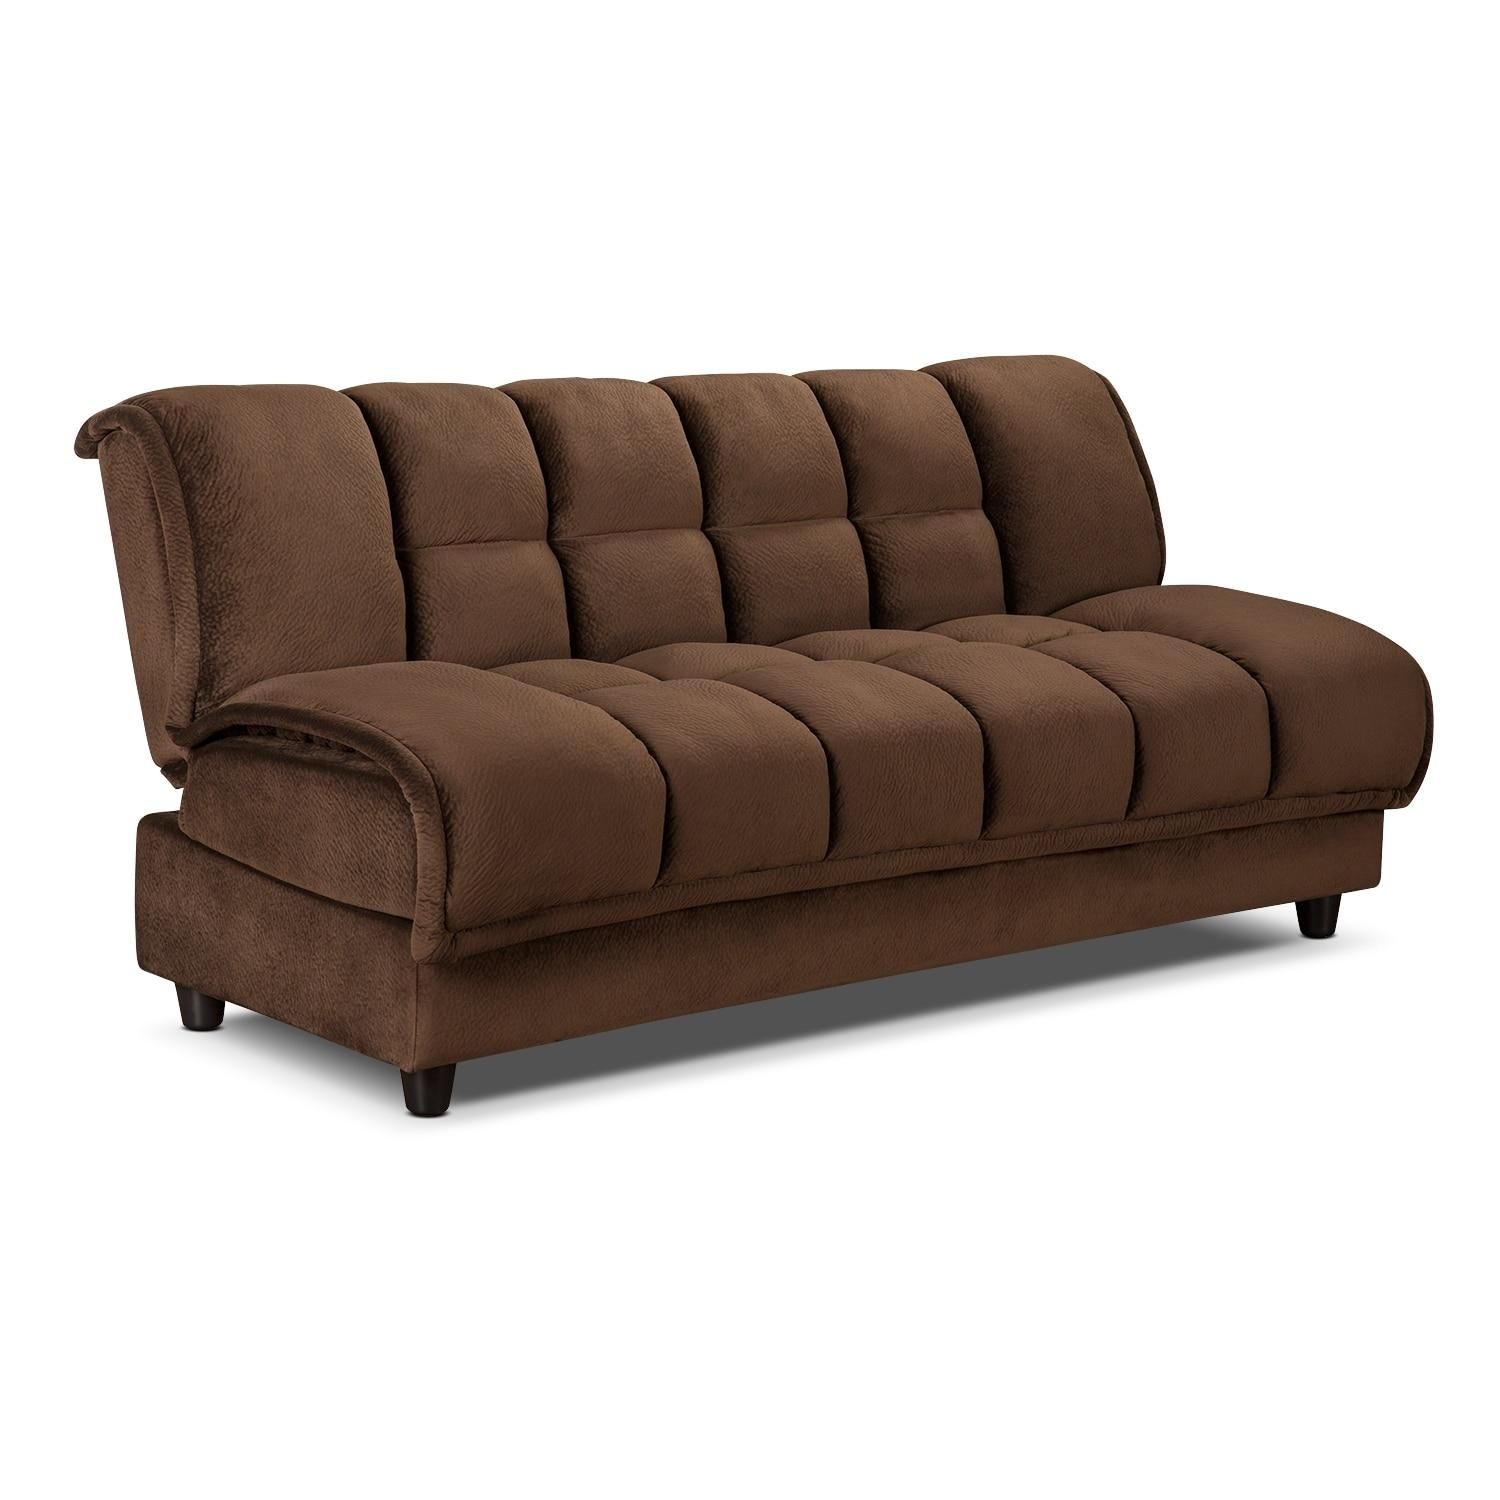 Sleeper Sofas | Value City Furniture | Value City Furniture Within Sofa Chairs For Bedroom (View 18 of 20)